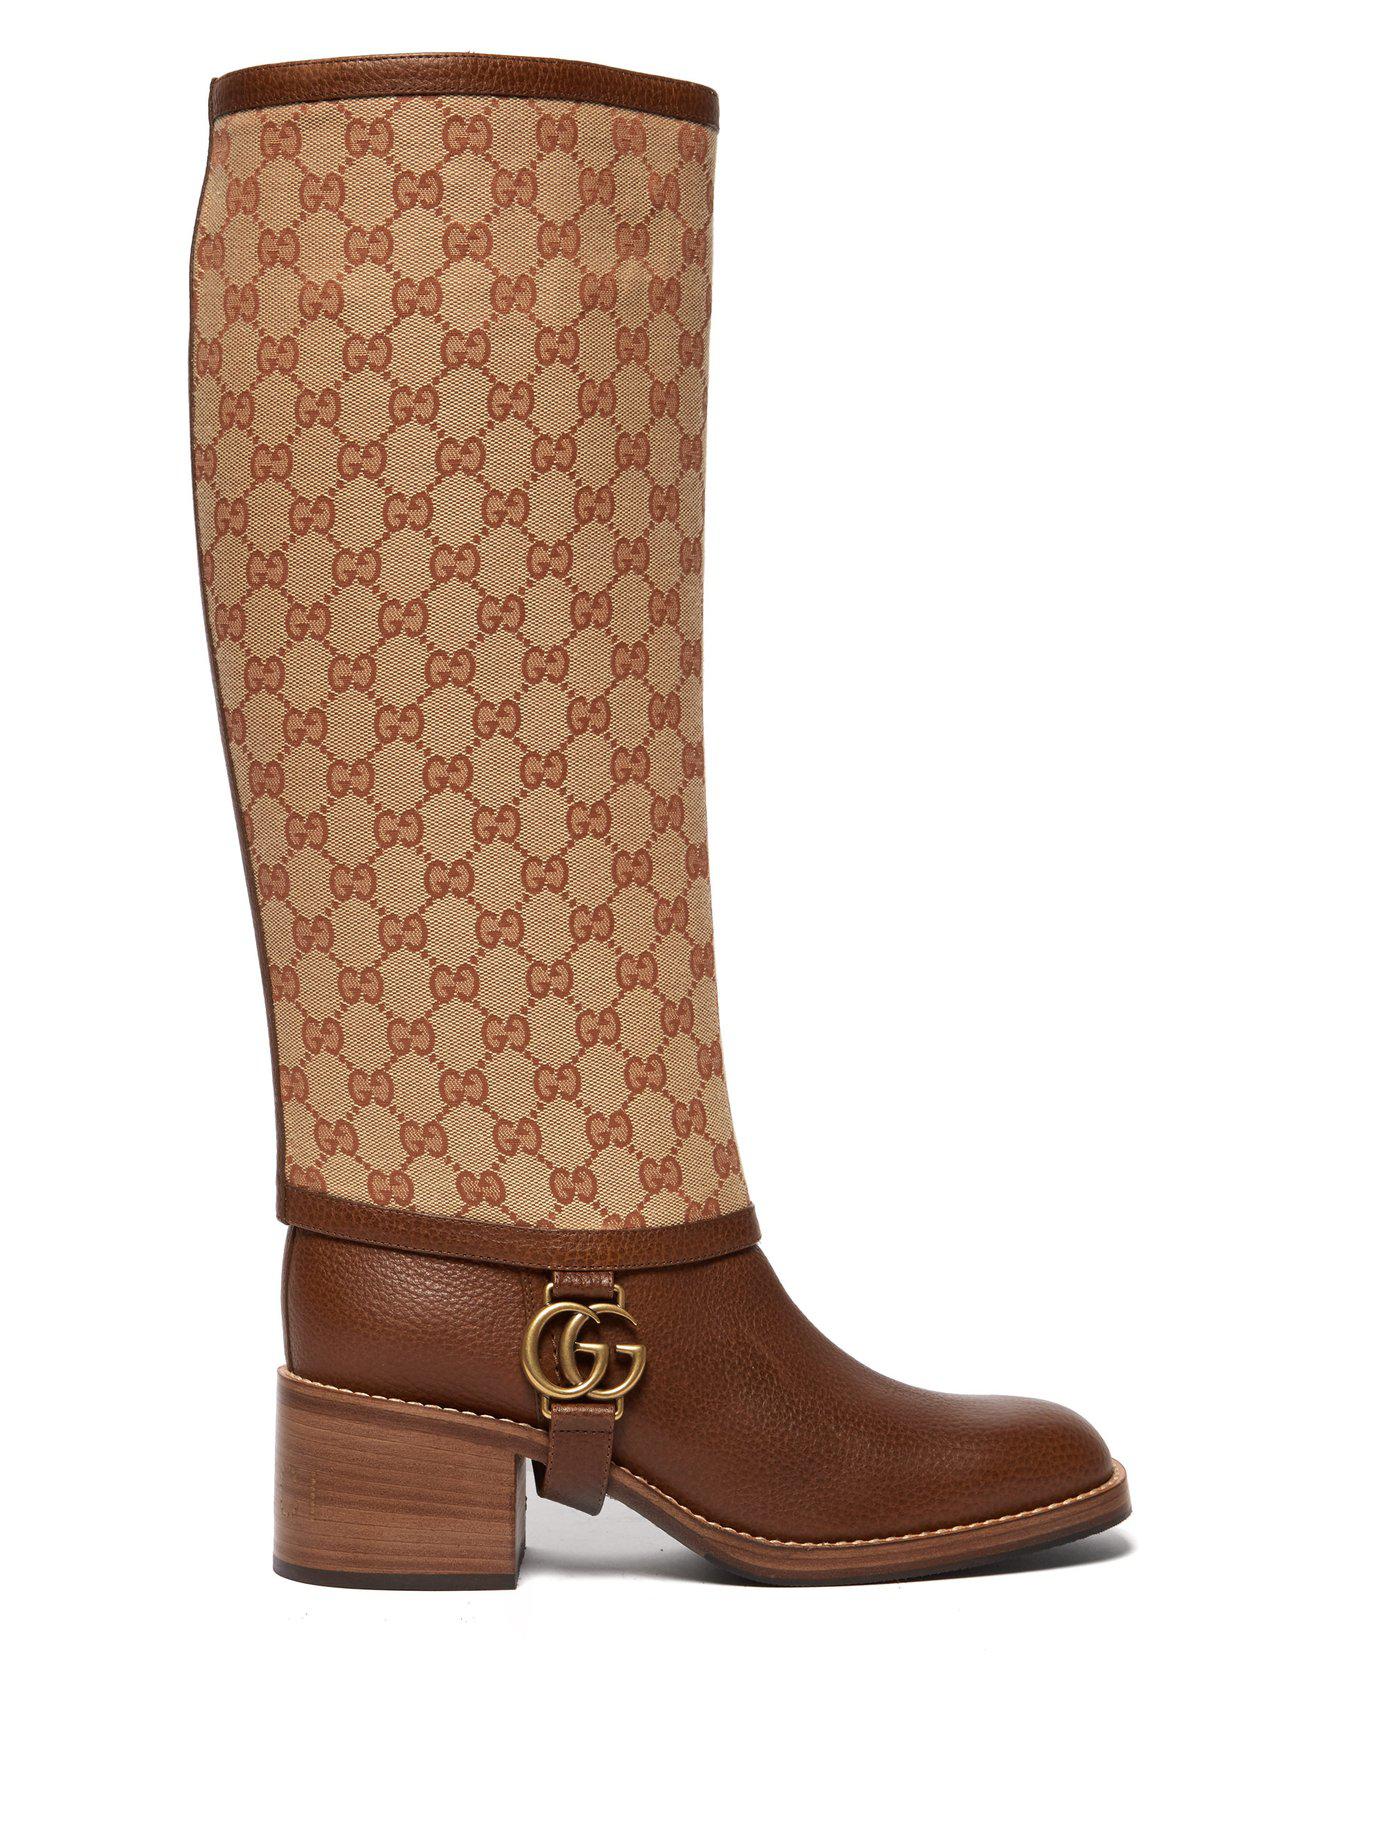 gucci boots brown